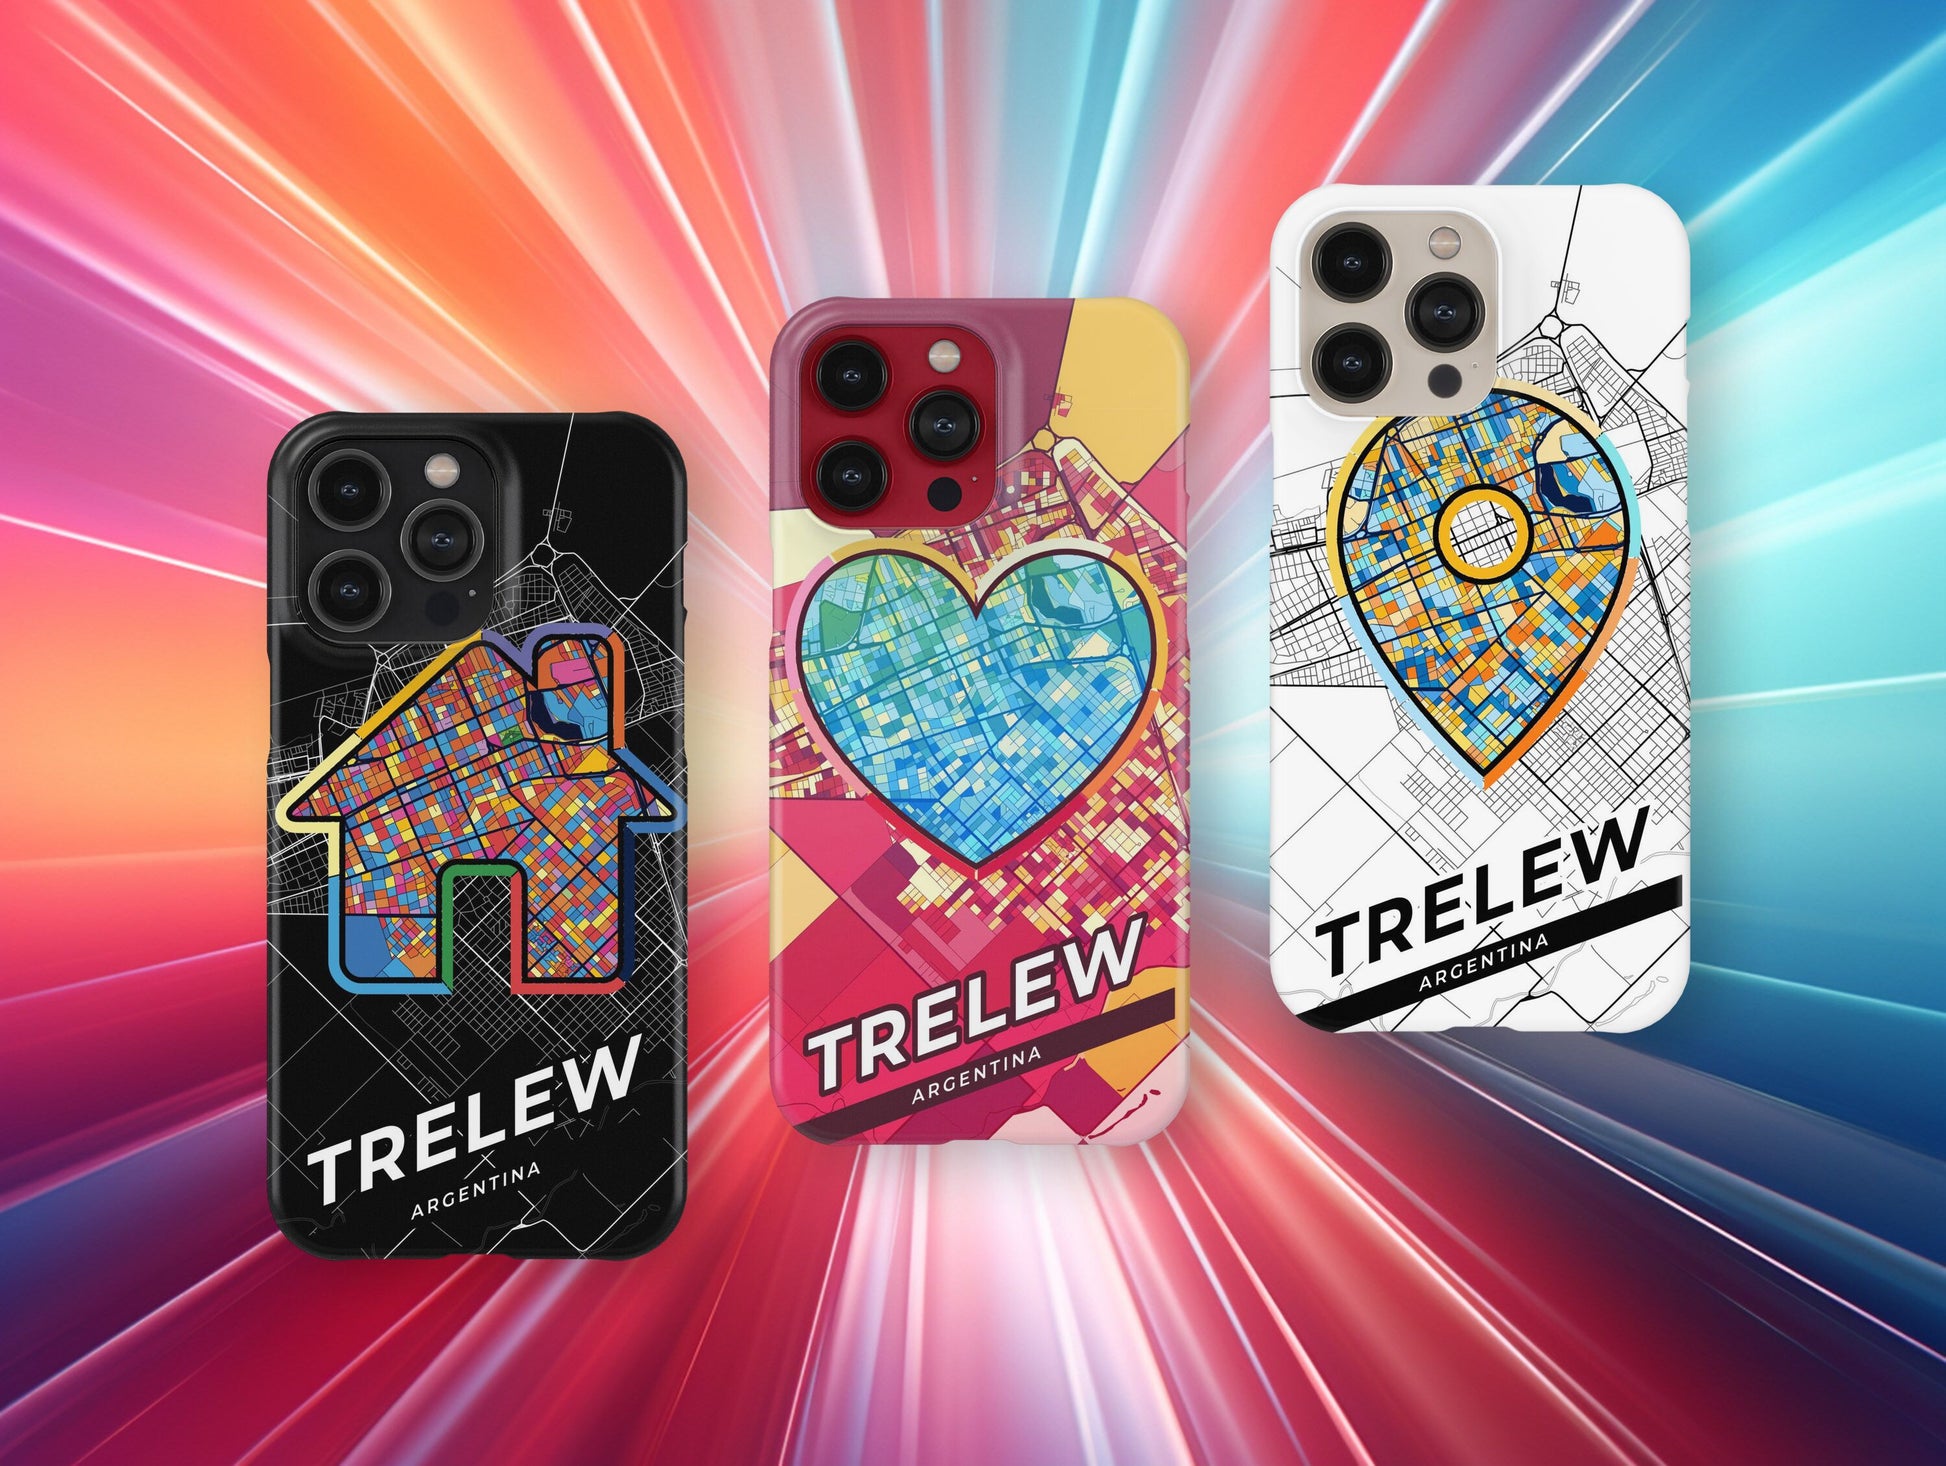 Trelew Argentina slim phone case with colorful icon. Birthday, wedding or housewarming gift. Couple match cases.